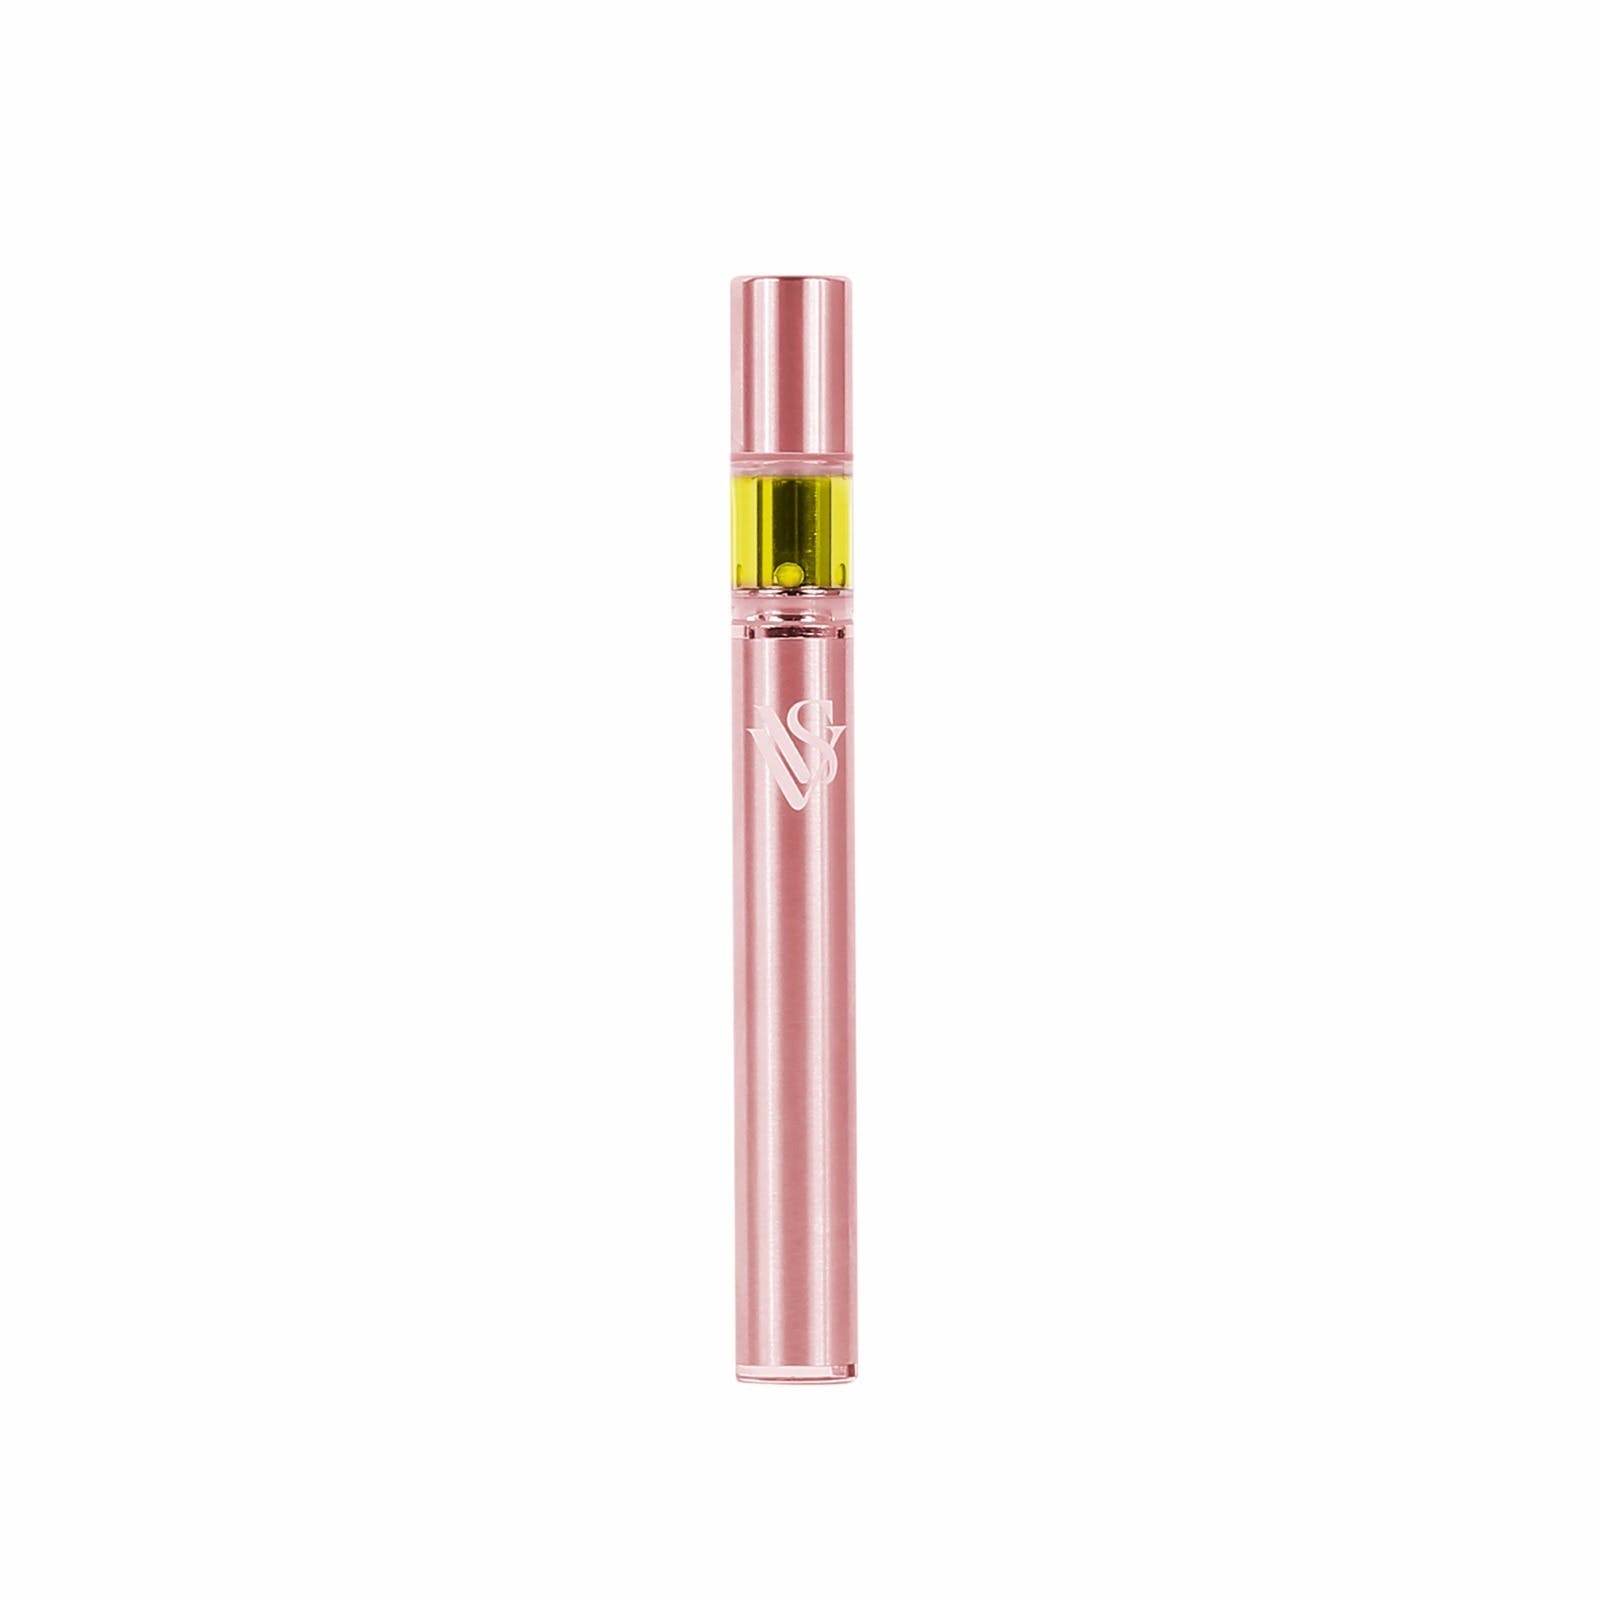 marijuana-dispensaries-mr-steal-your-patients-2419-cap-in-whittier-disposable-pens-rose-gold-ccell-technology